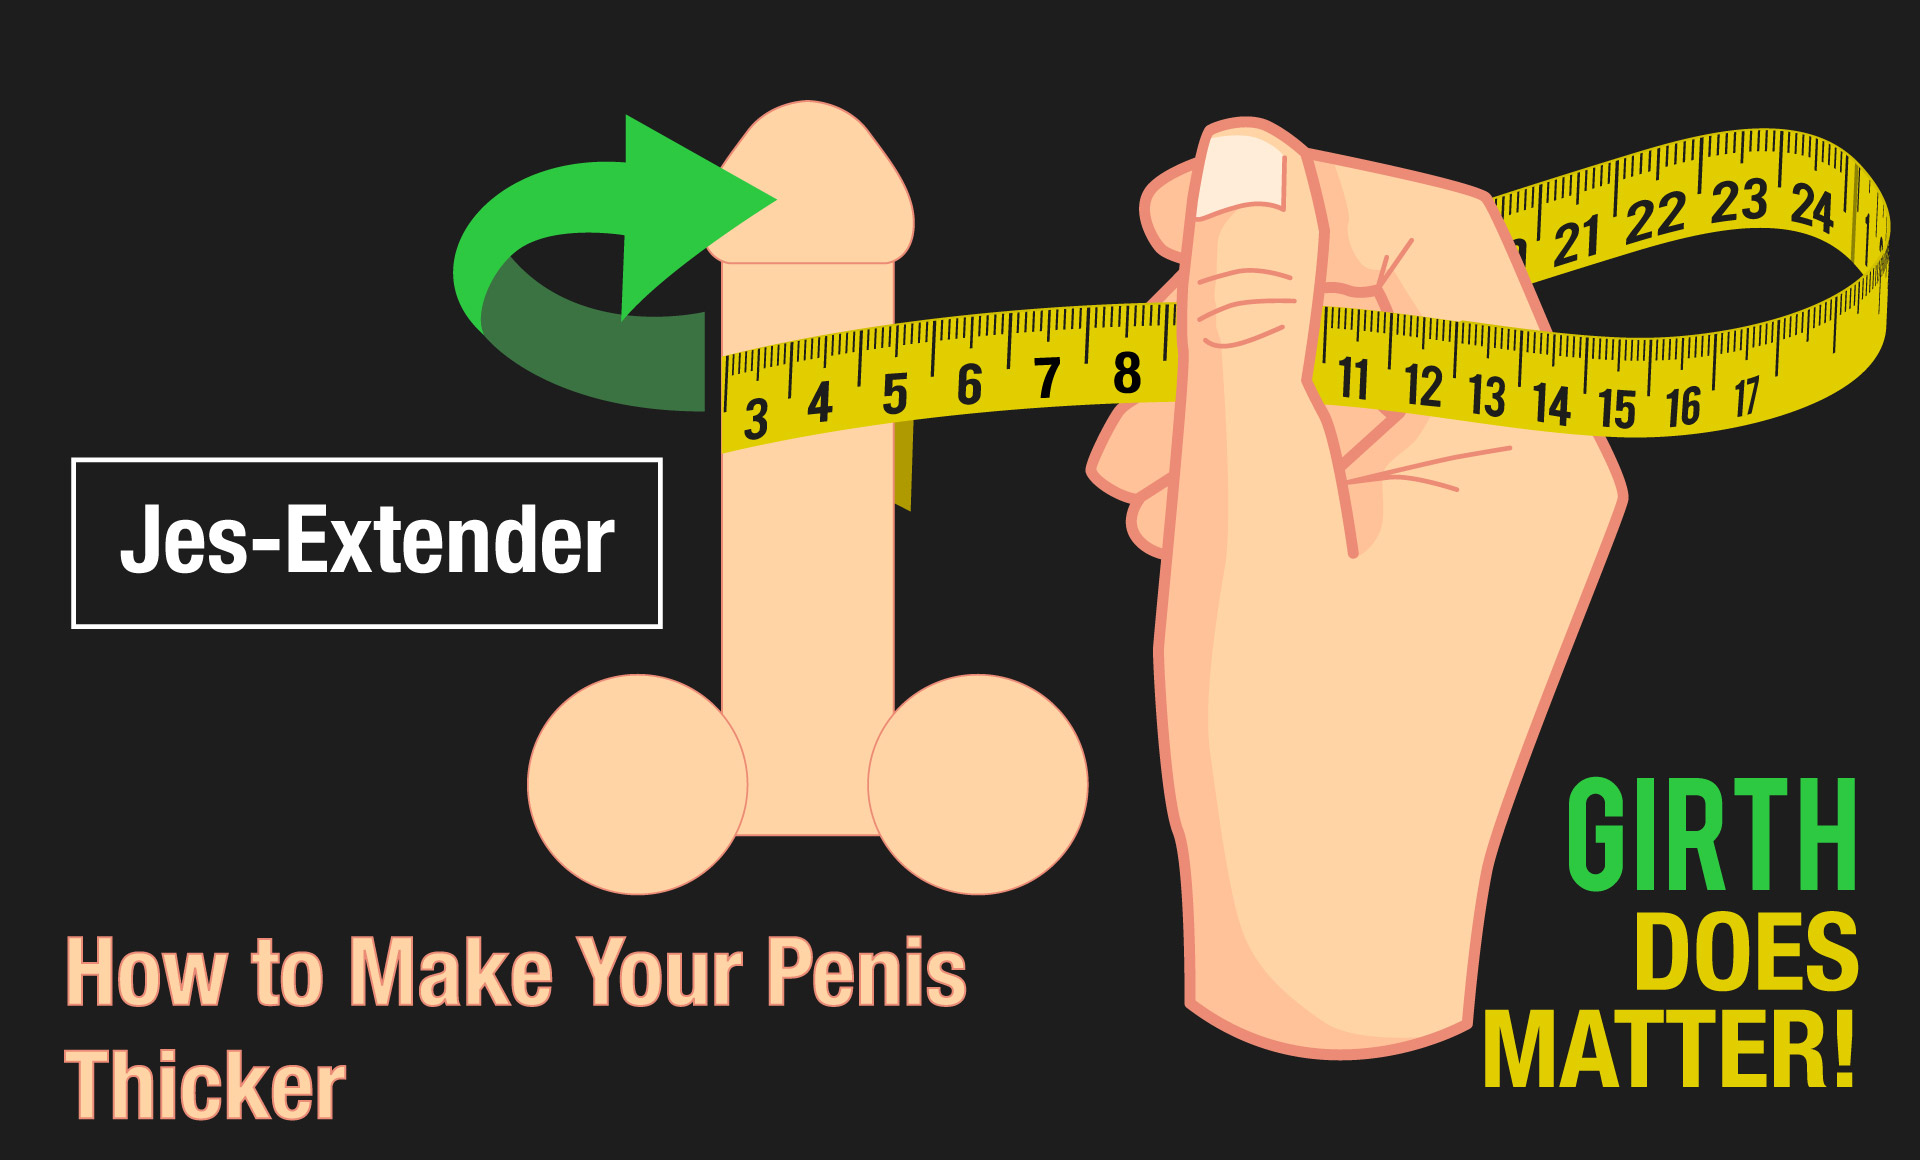 How to Make Your Penis Thicker